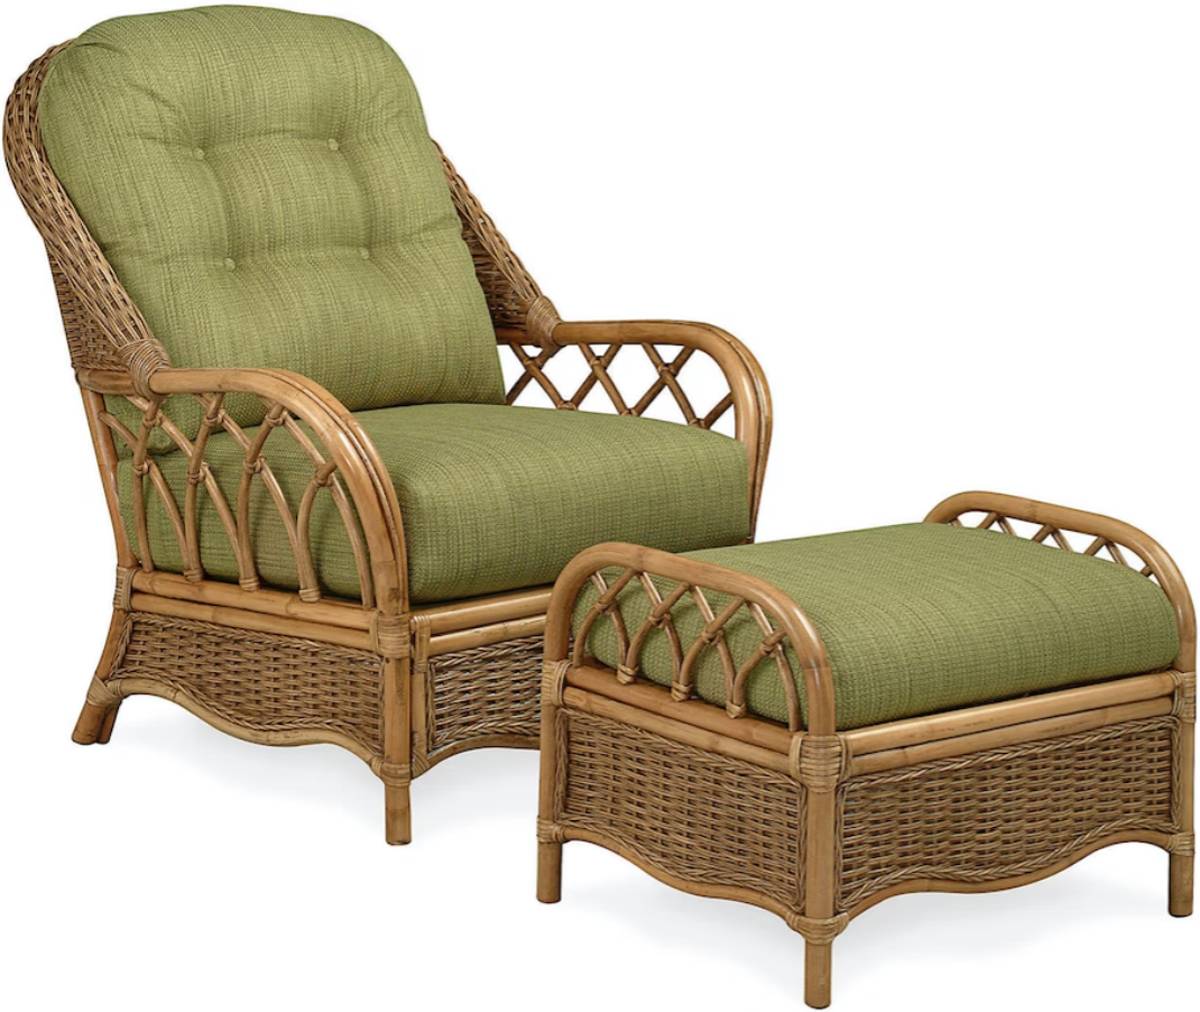 EVERGLADE CHAIR AND OTTOMAN SET BY BRAXTON CULLER